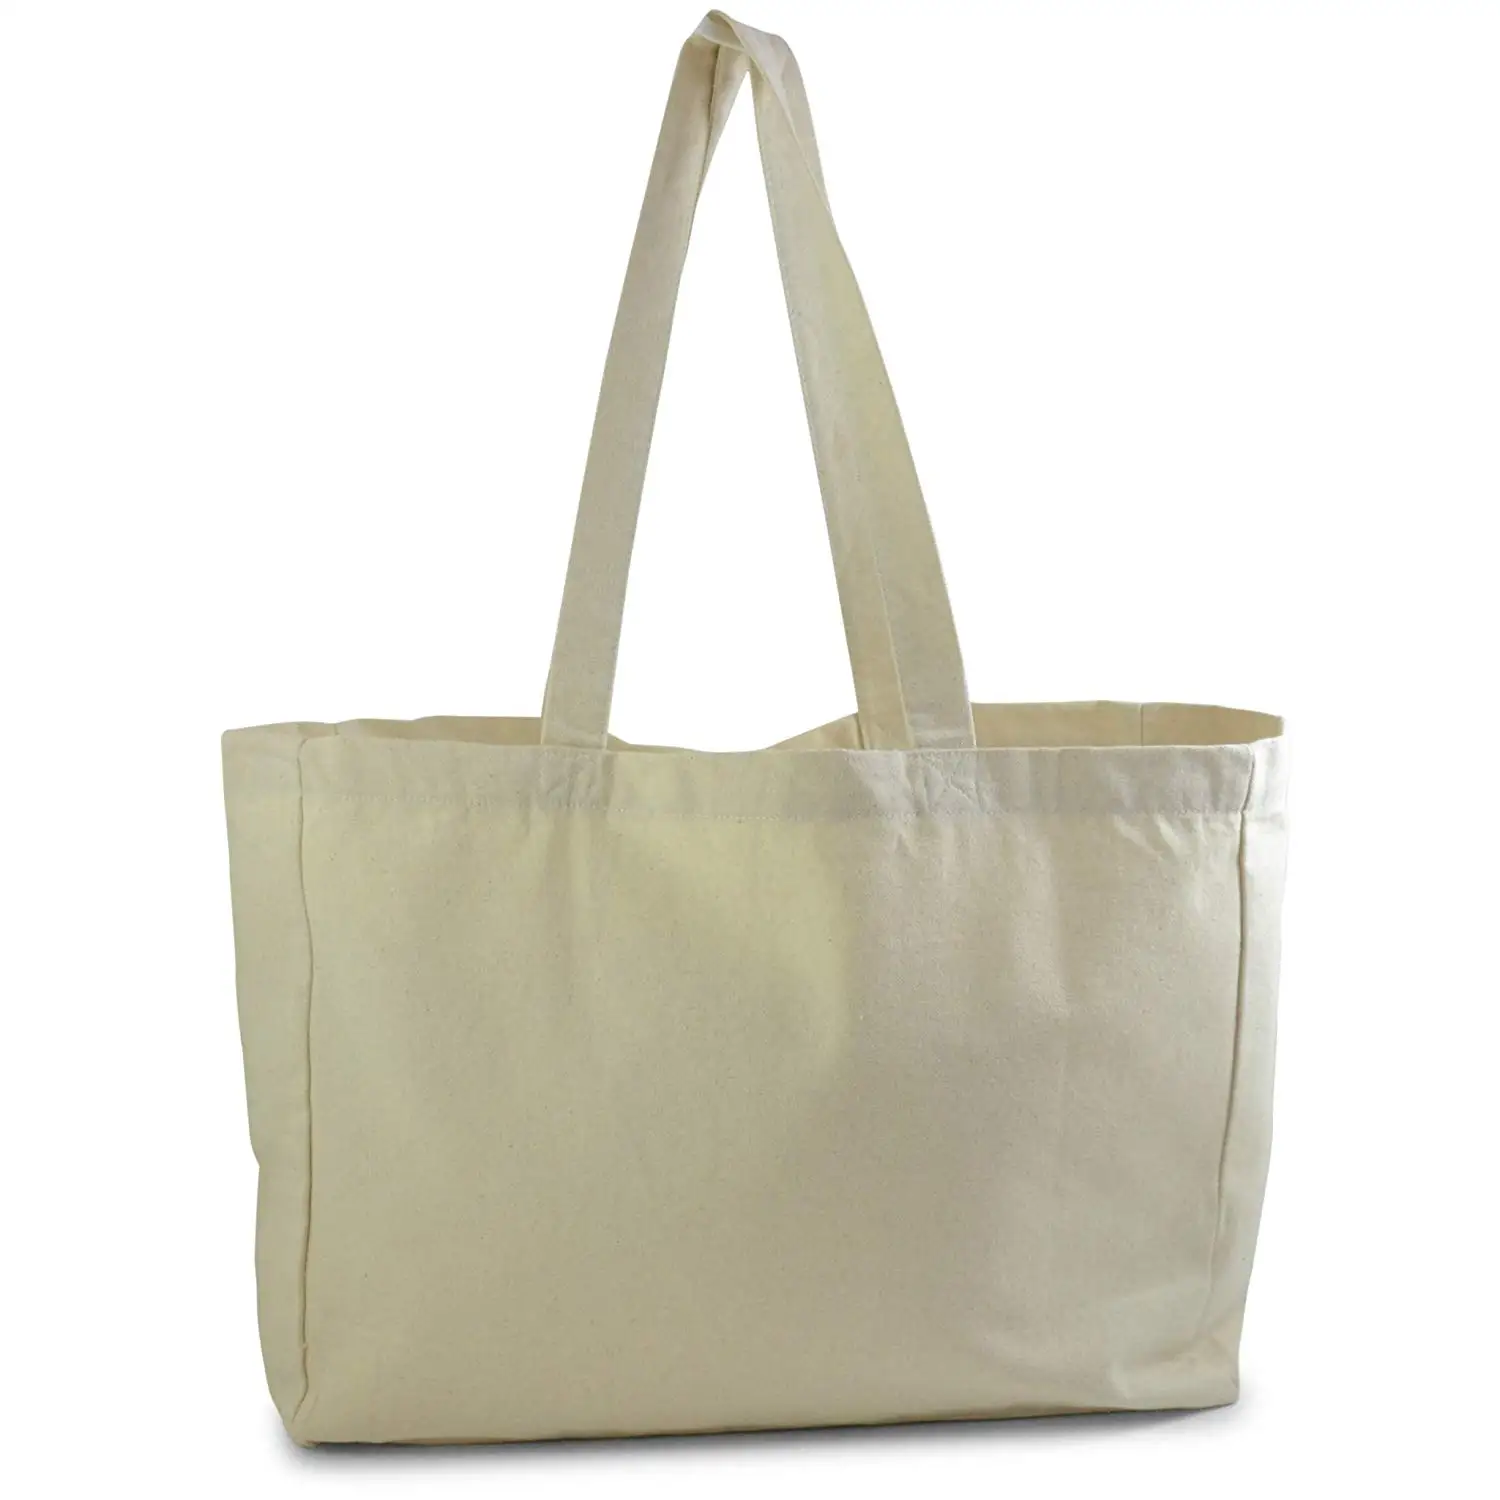 Reusable Blank Totes - Extra Thick Natural Cotton Plain Canvas Tote Bag ...